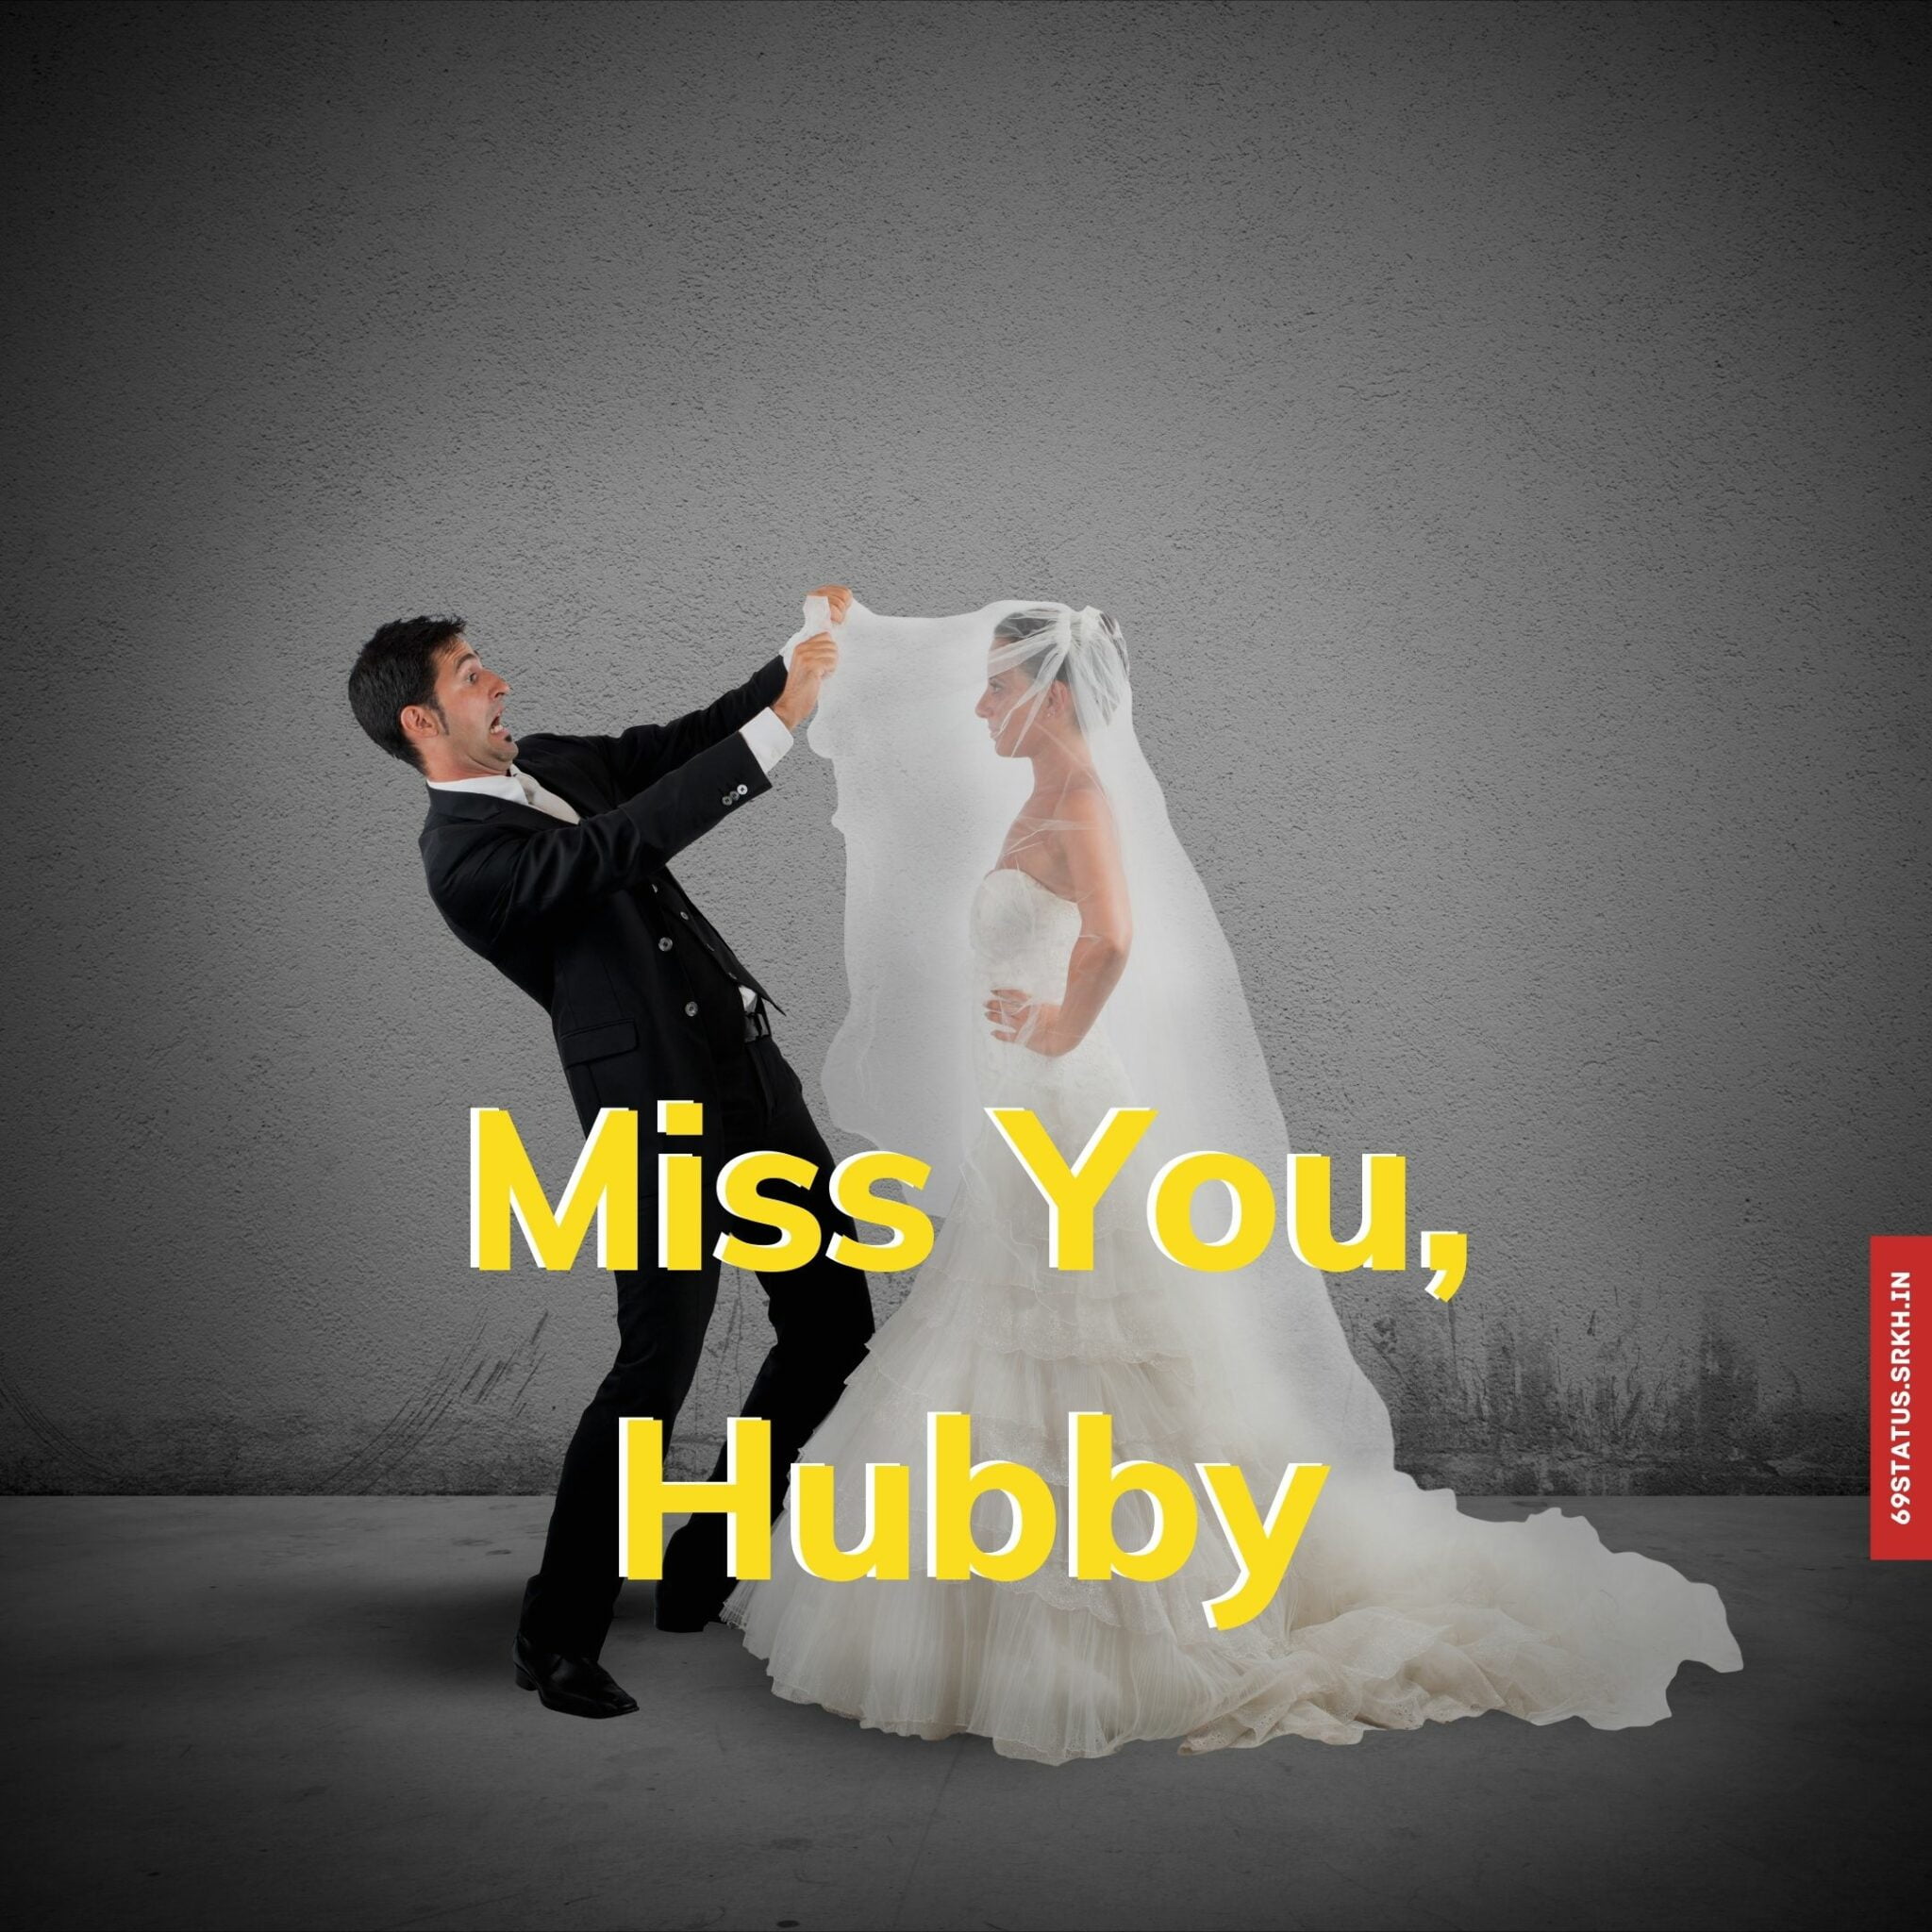 Miss you hubby images